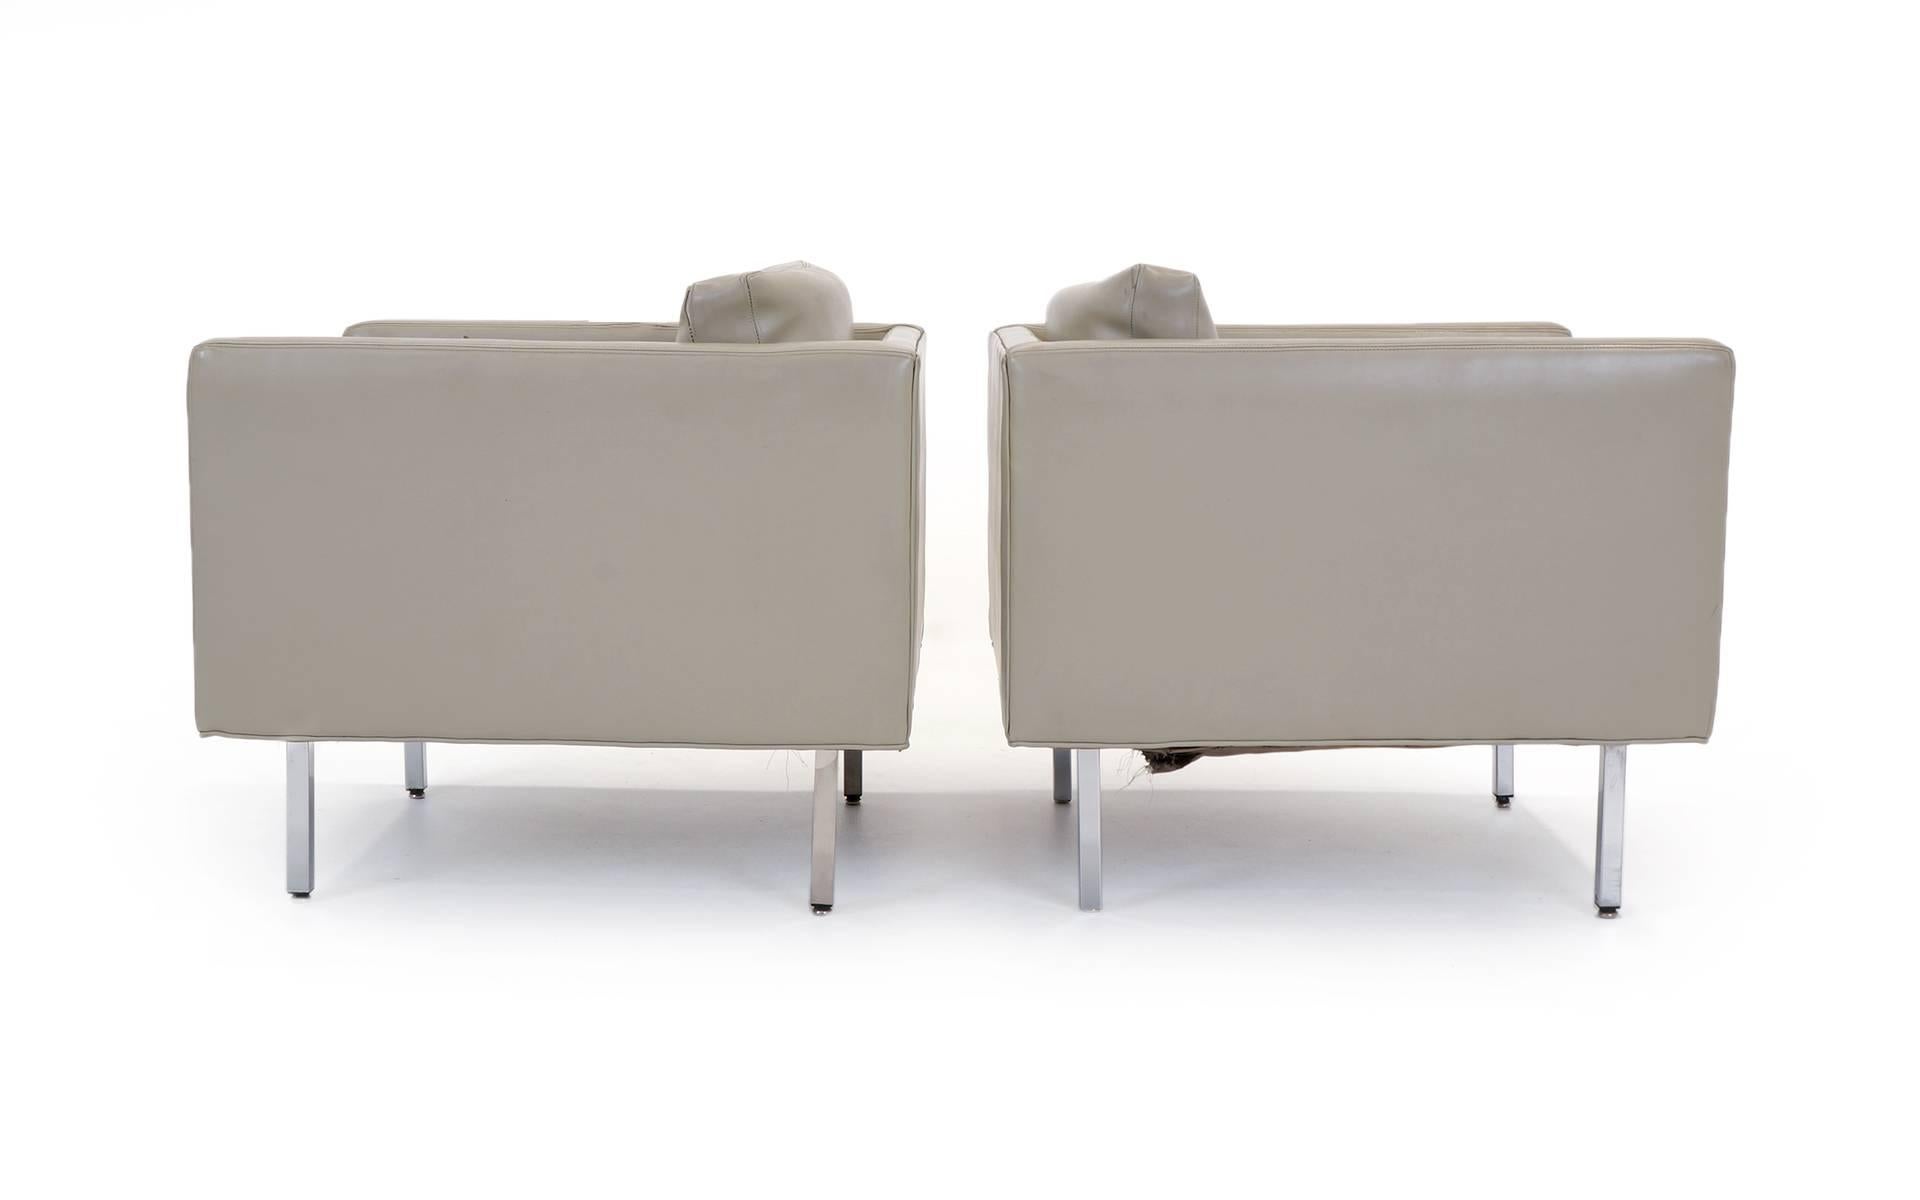 American Pair of Even Arm Cube Lounge Chairs by Milo Baughman for Thayer Coggin